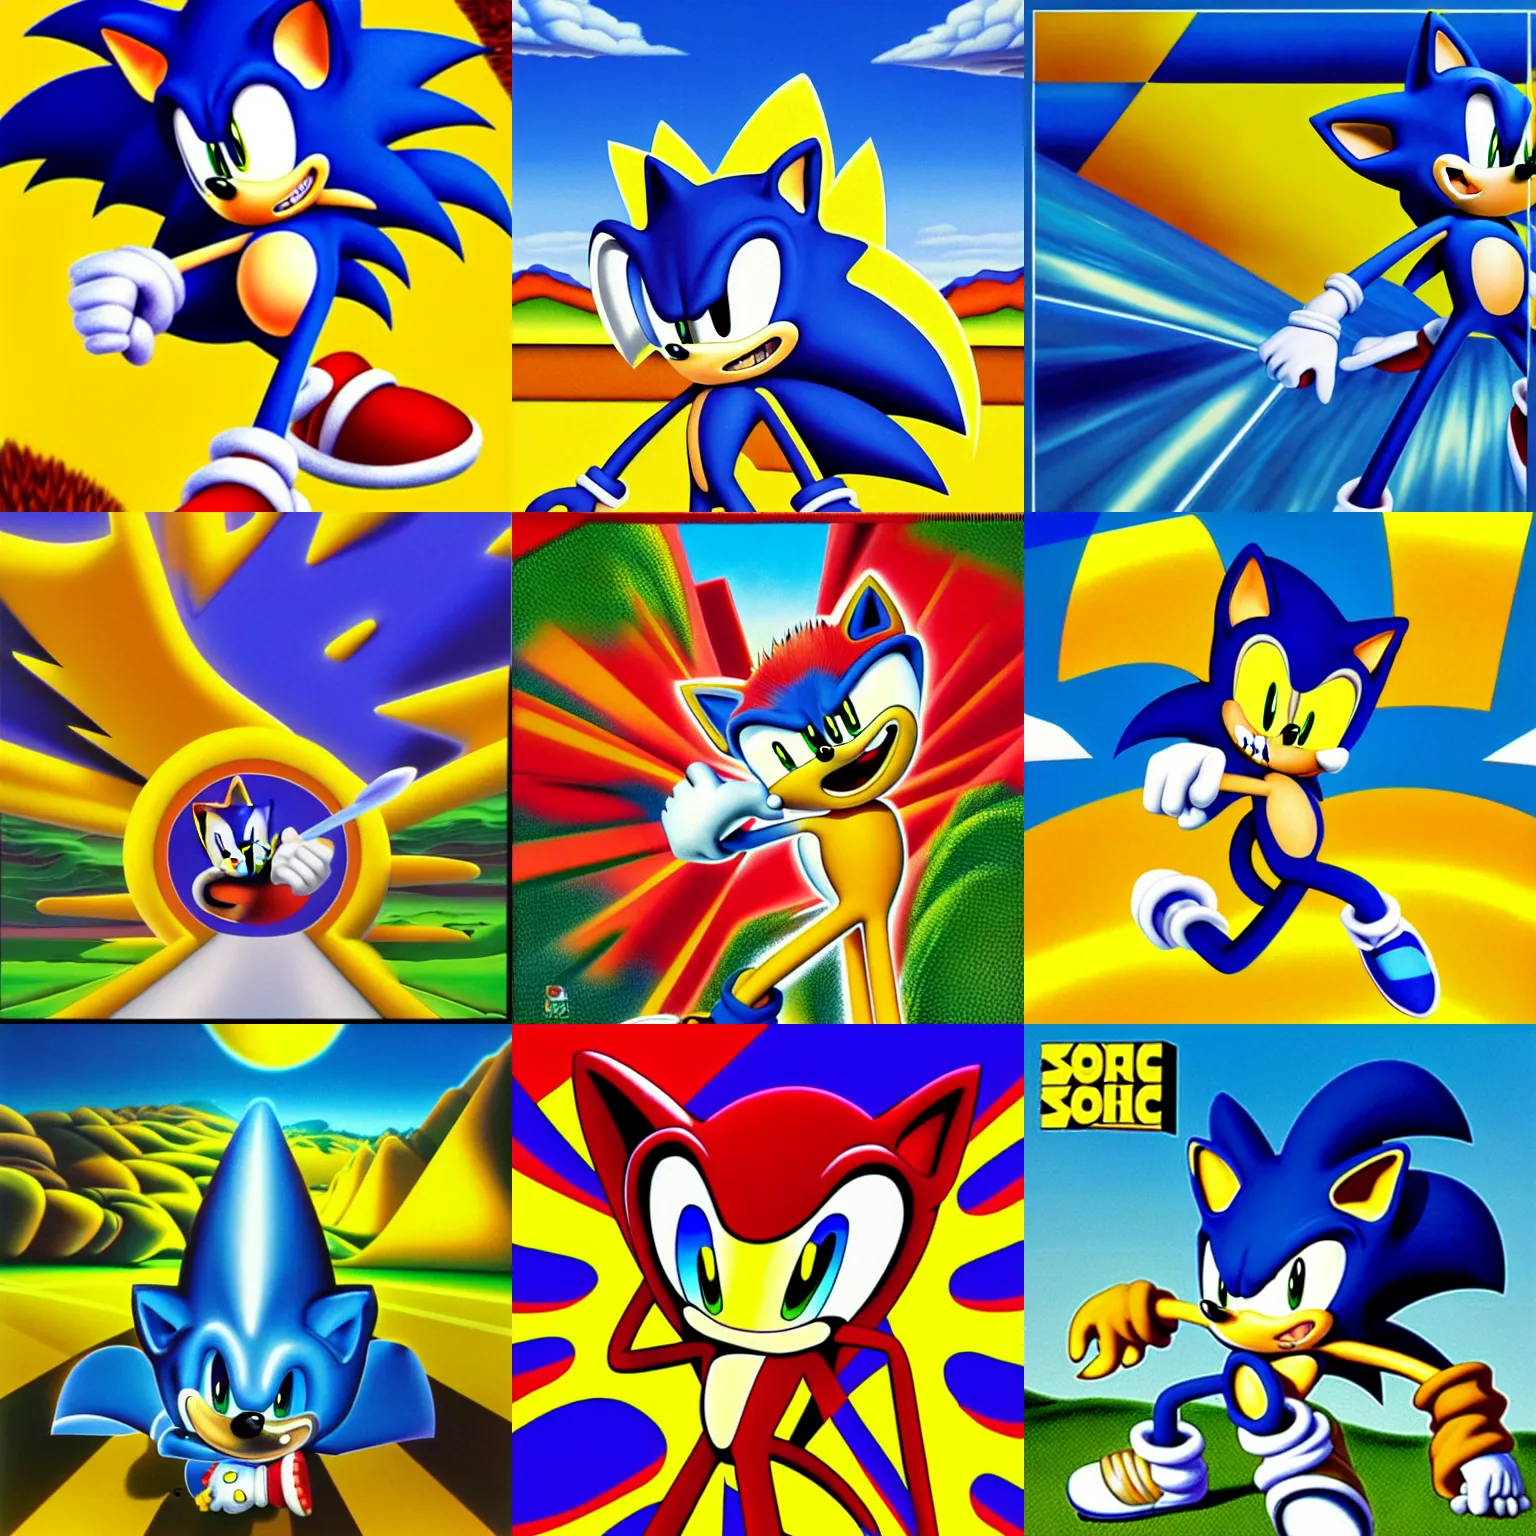 Prompt: surreal, sharp, detailed professional, high quality airbrush art album cover of a sonic the hedgehog, yellow checkerboard landscape, 1990s 1992 style of John Kricfalusi, Sega Genesis box art